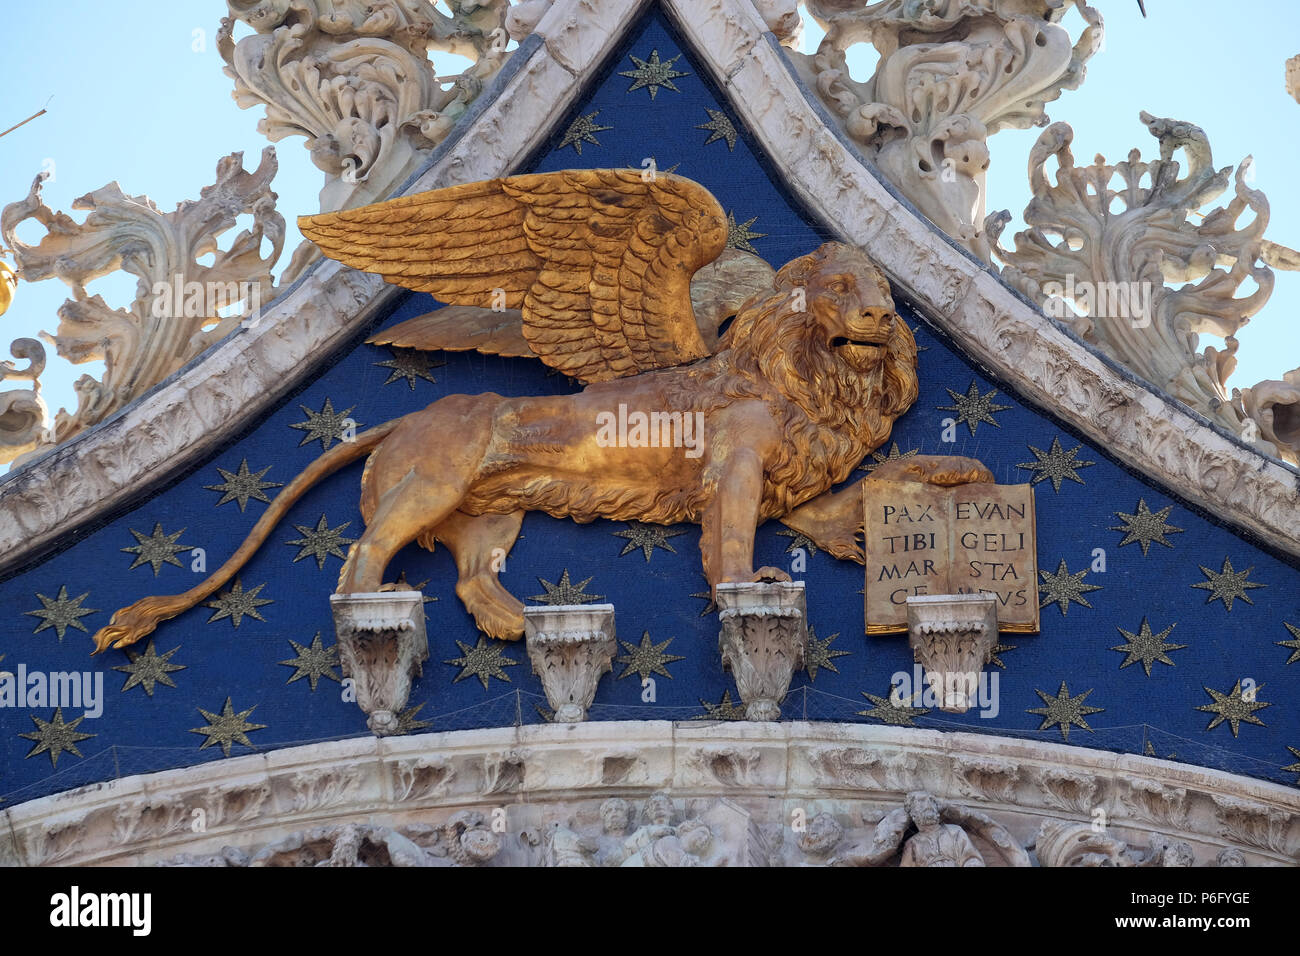 Statue golden winged lion, symbol of Venice on the Basilica of St. Mark on Piazza San Marco, Venice, Italy Stock Photo